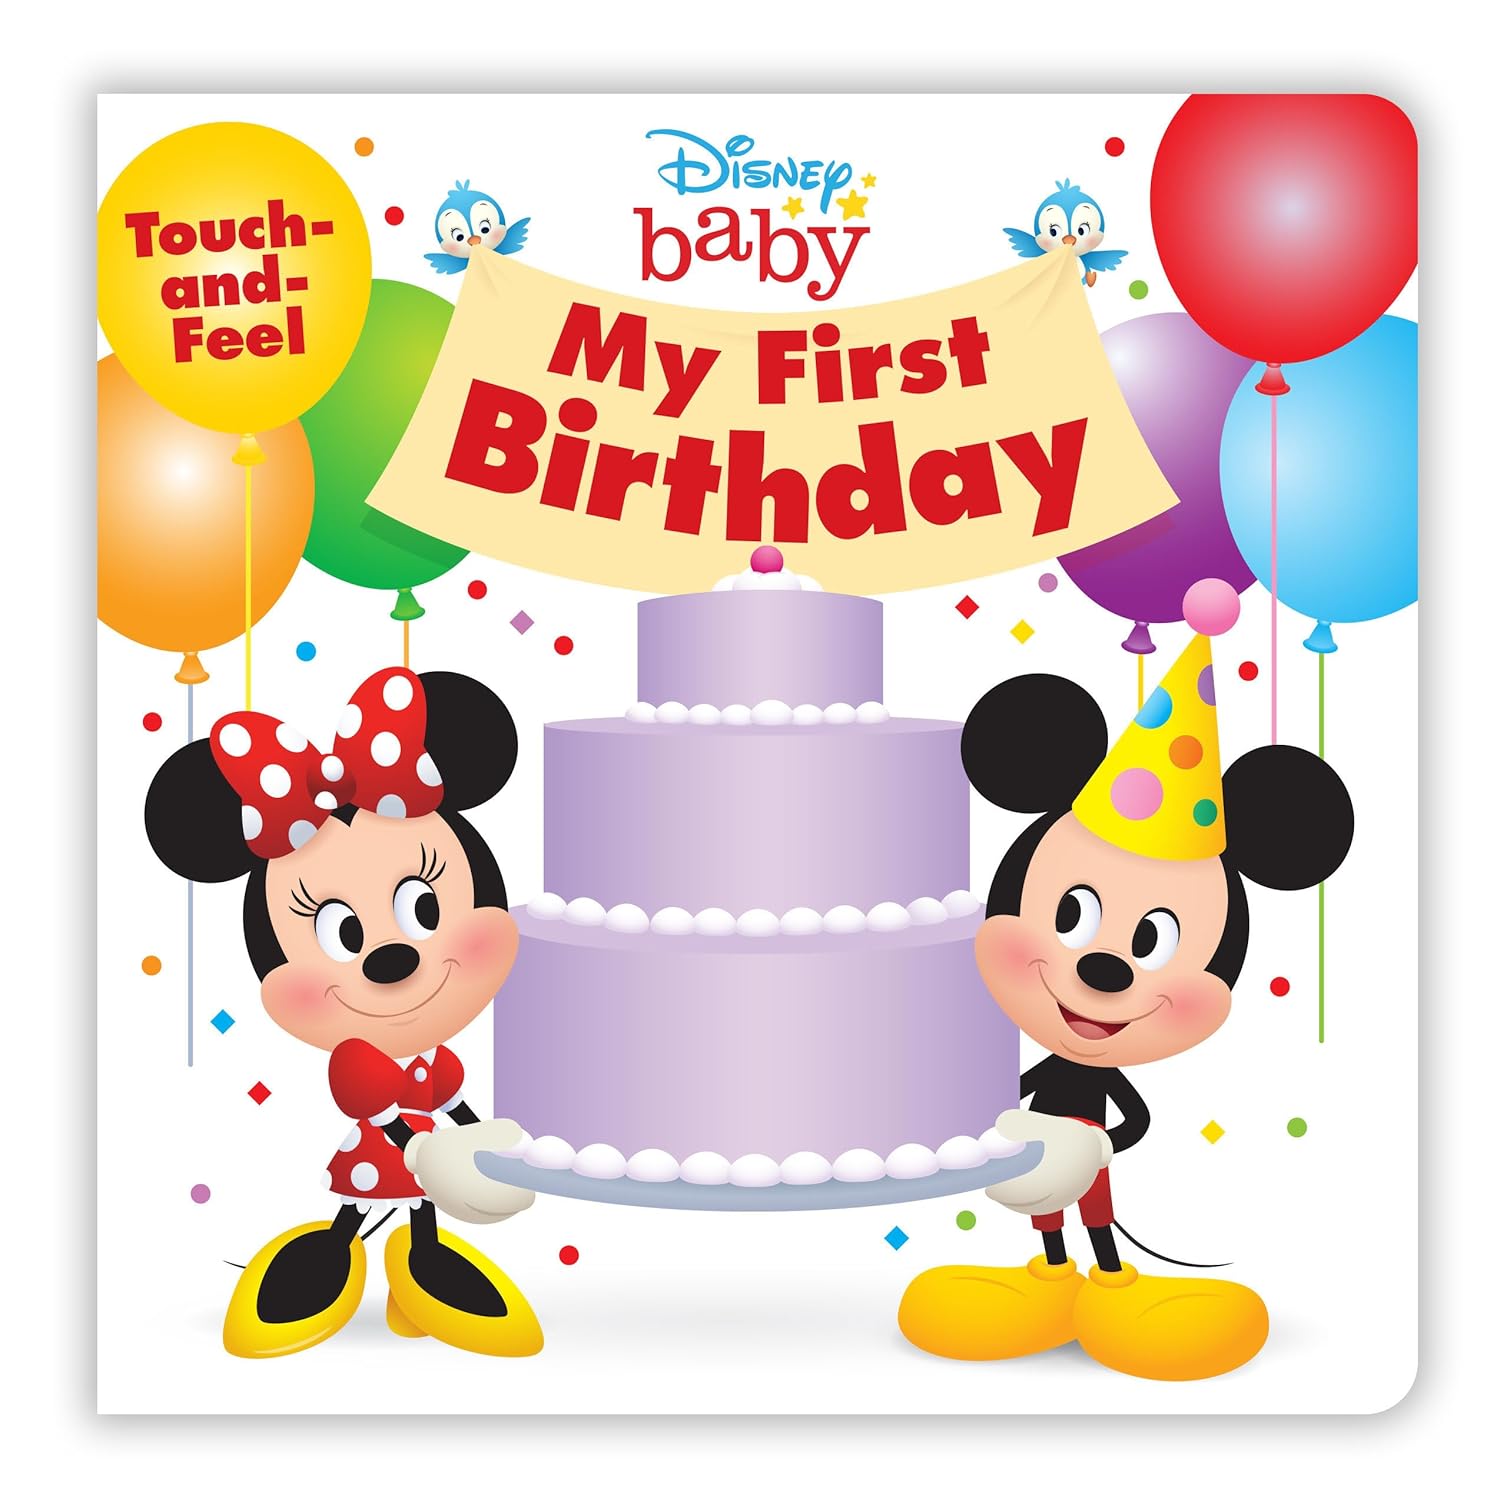 https://thepintopony.com/wp-content/uploads/2024/05/Disney-Baby-Book-The-Perfect-First-Birthday-Gift.jpg